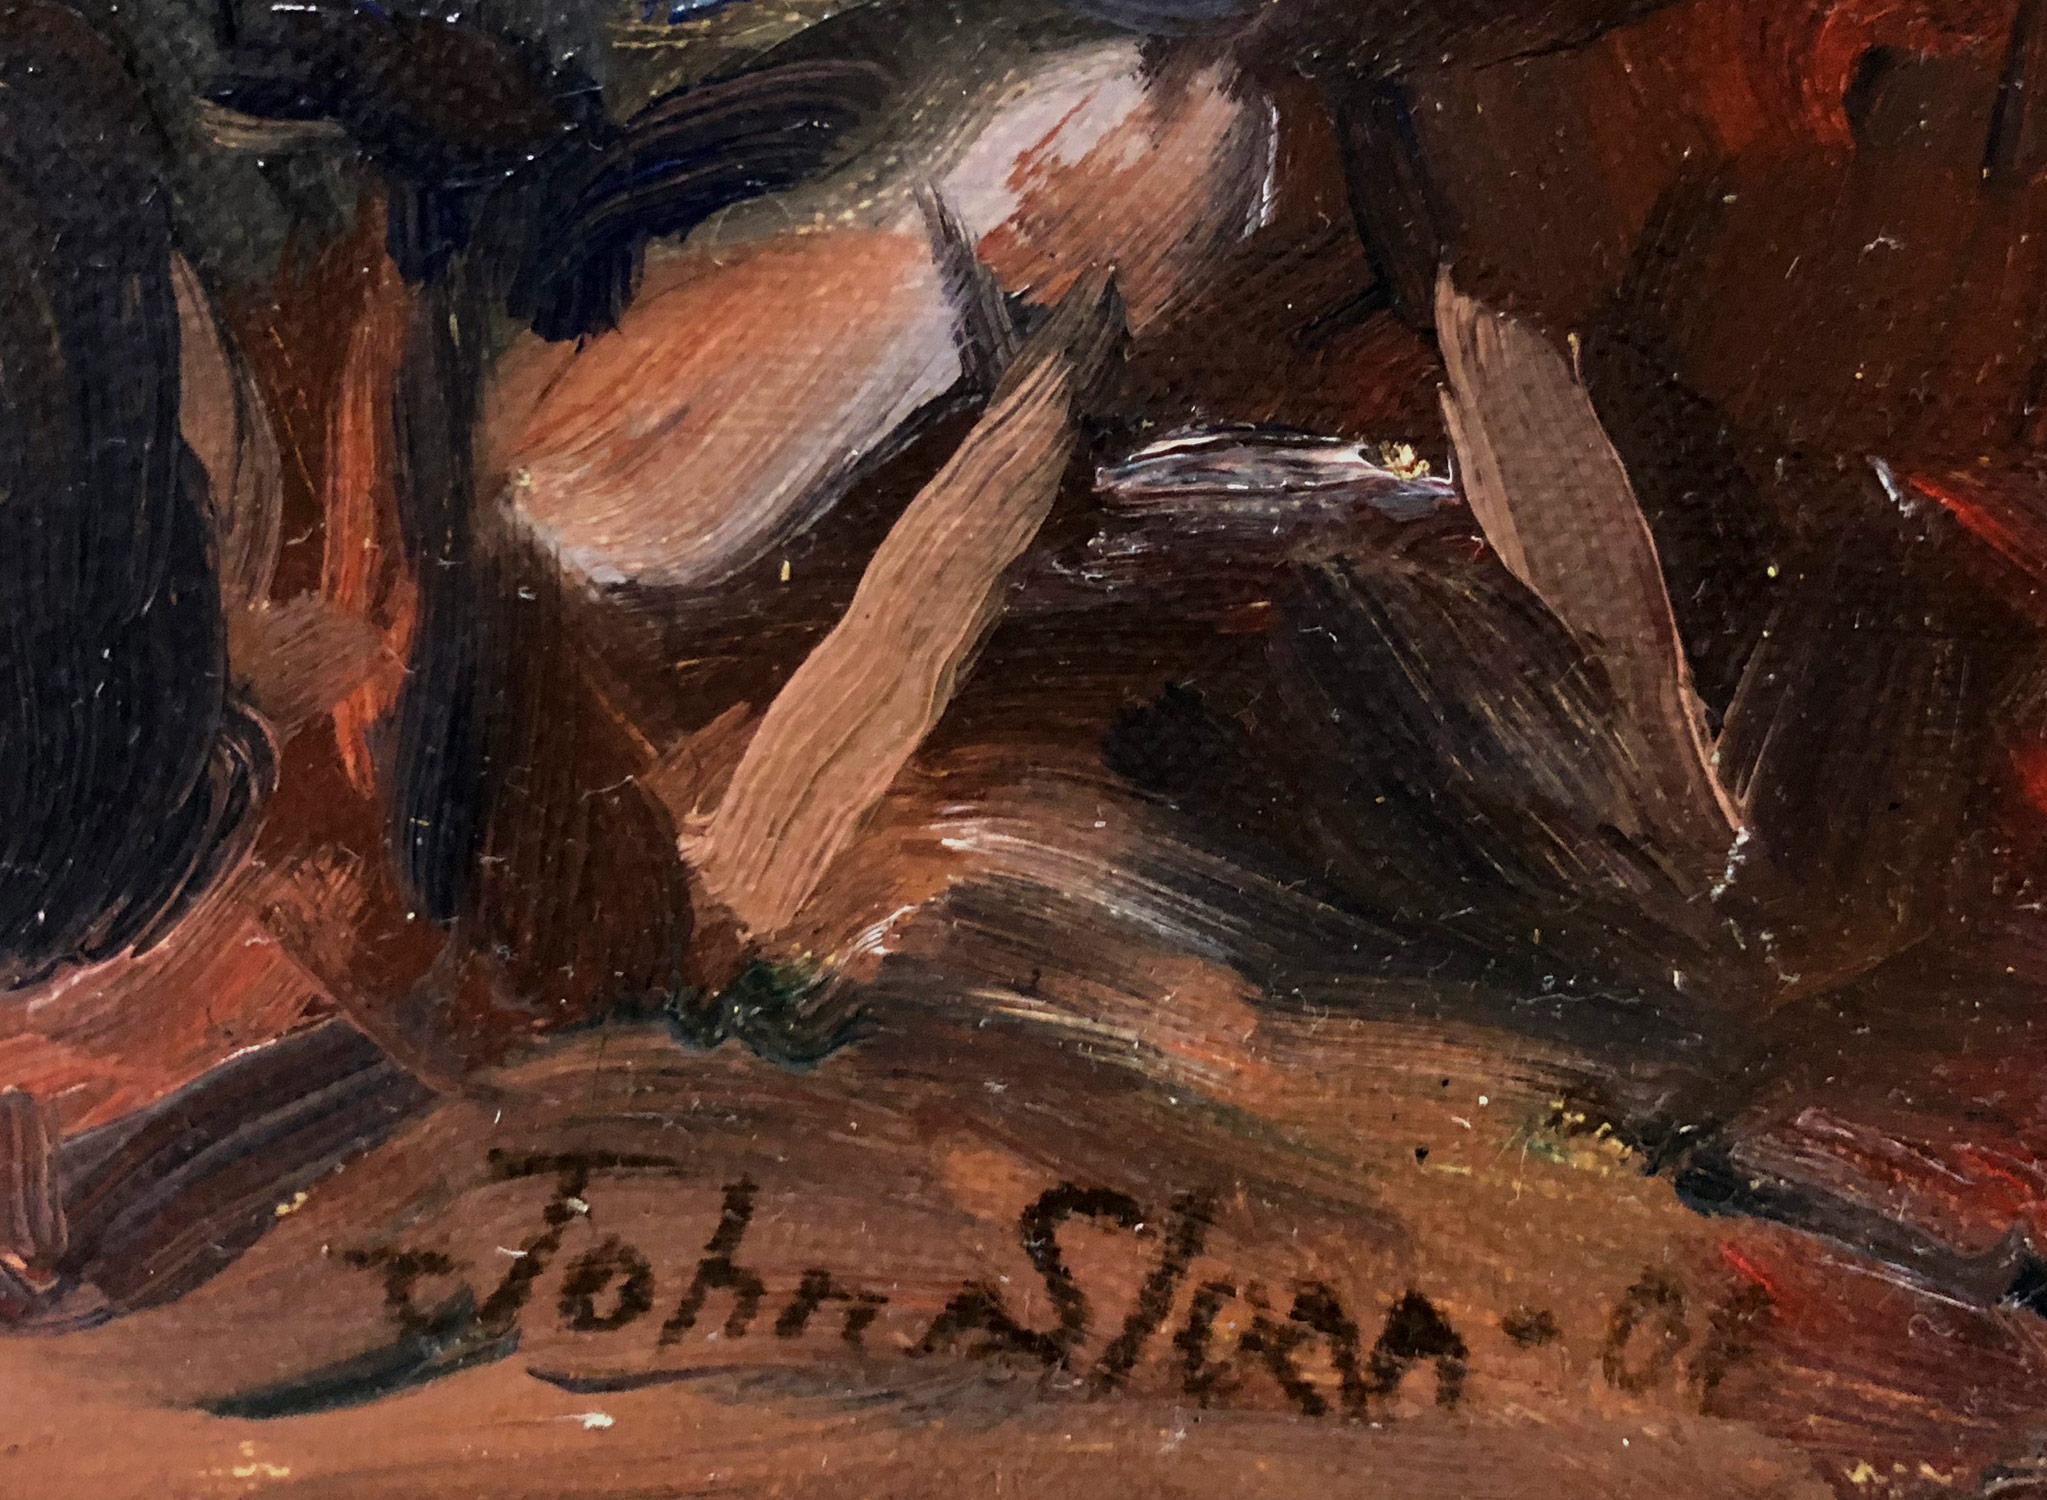 Sloan was noted as one of the 8 and founders from the Ashcan School and credited a leading example in art during the early 20th Century. This piece is from 1908 and depicts figures in an interior done with quick brush work and gestural placement of